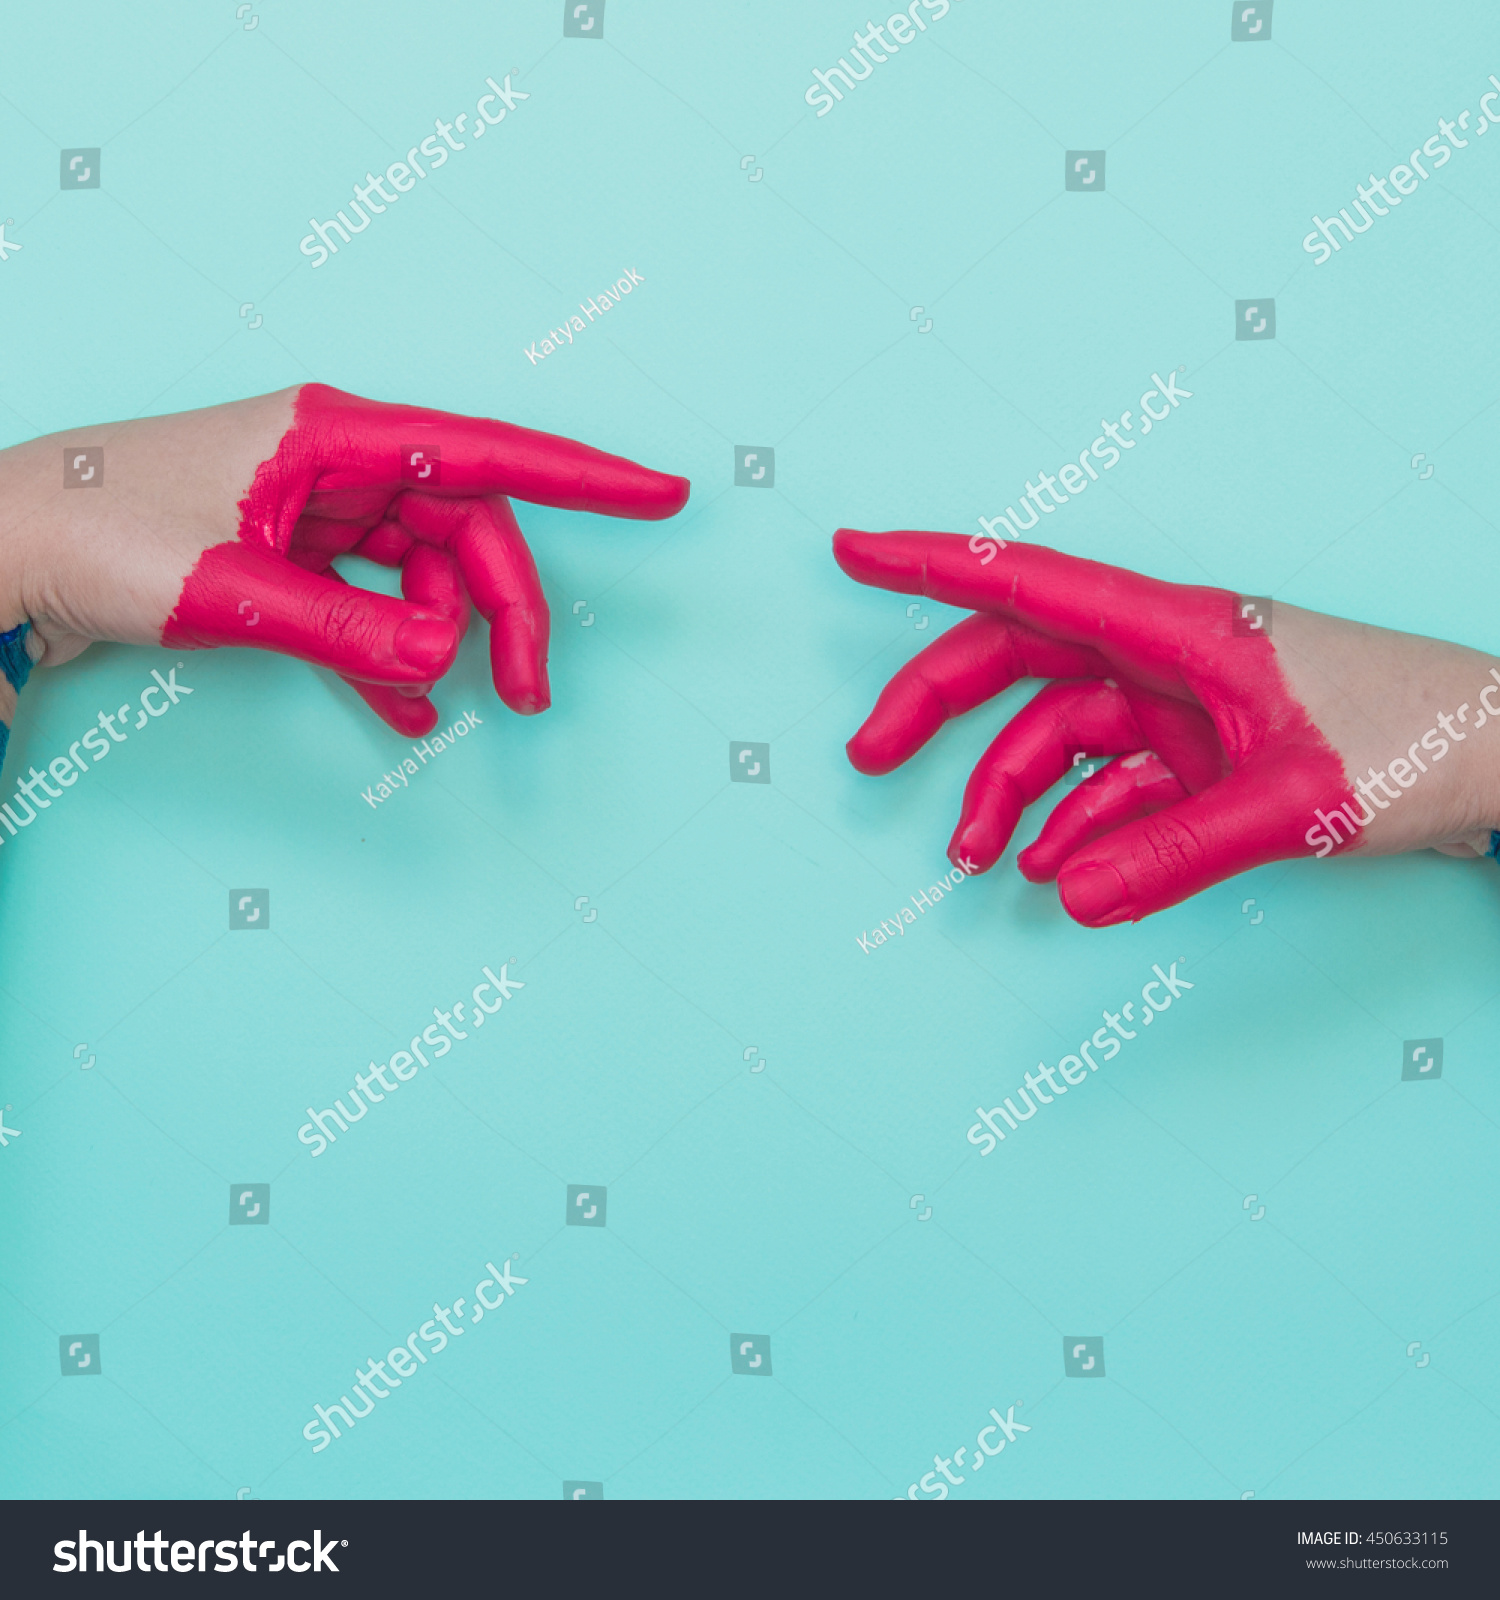 Two painted hands try to reach each other's fingers. Creative connecting conception.  #450633115